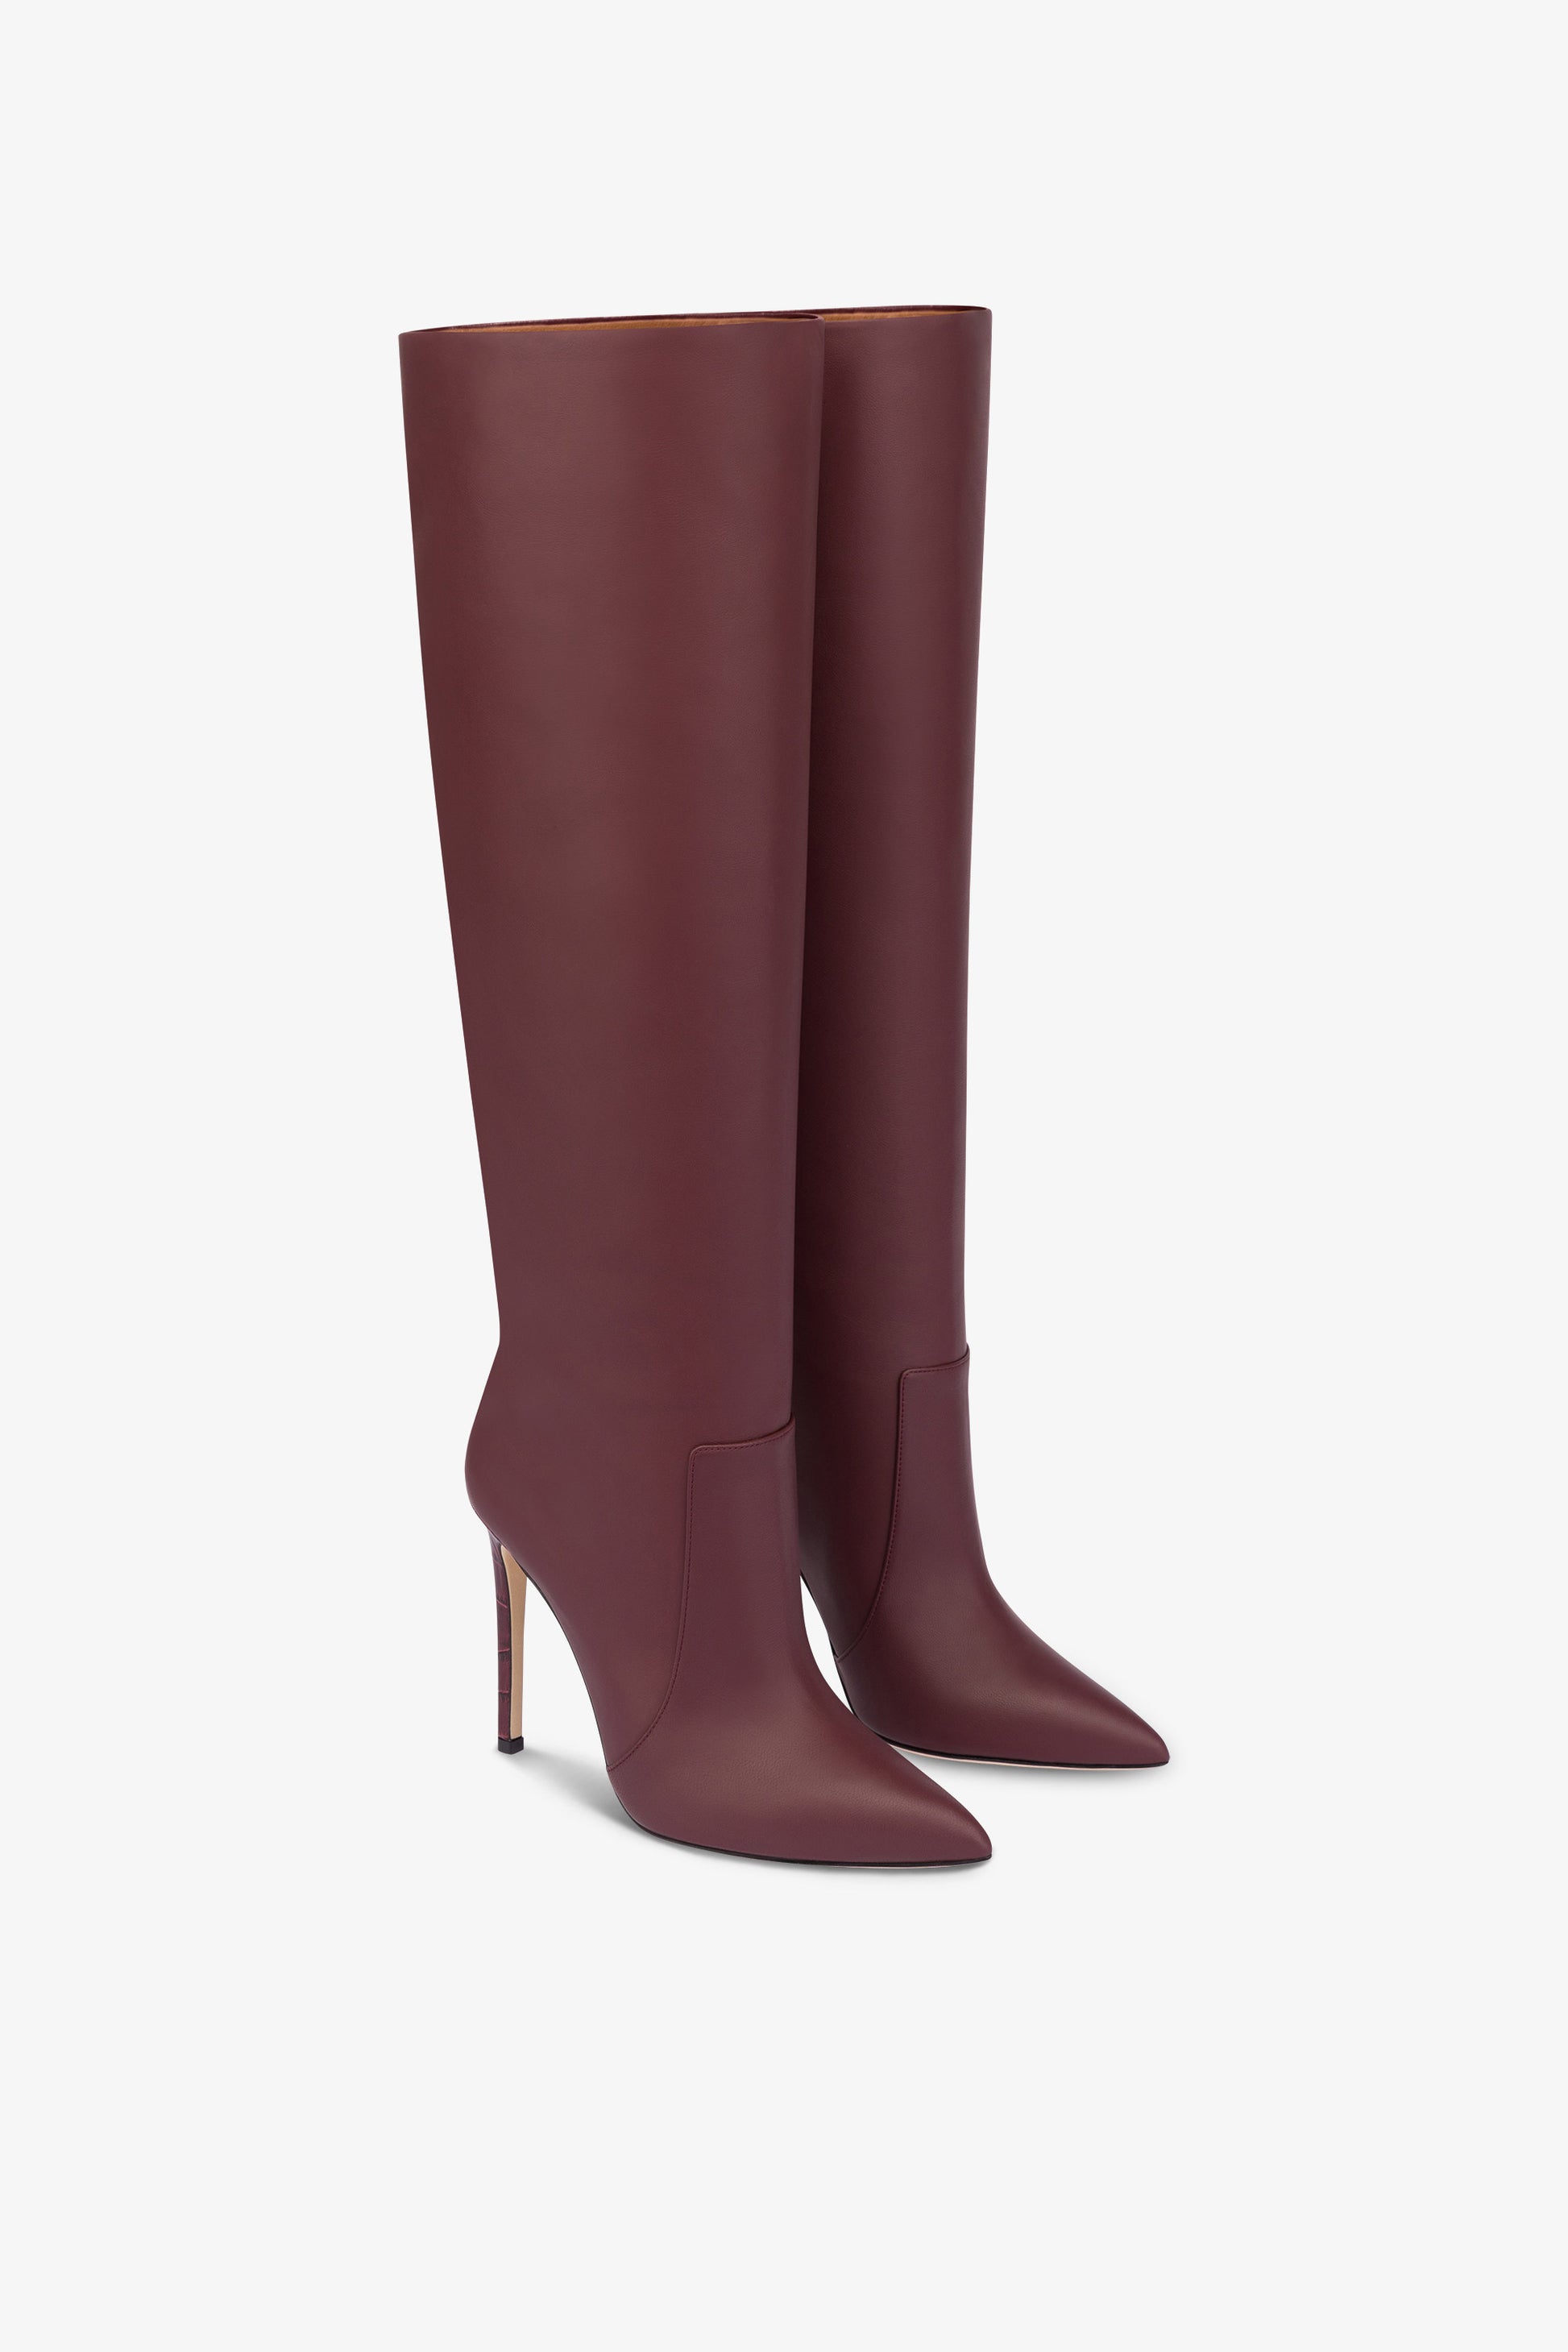 Pointed knee-high boots in smooth burgundy leather